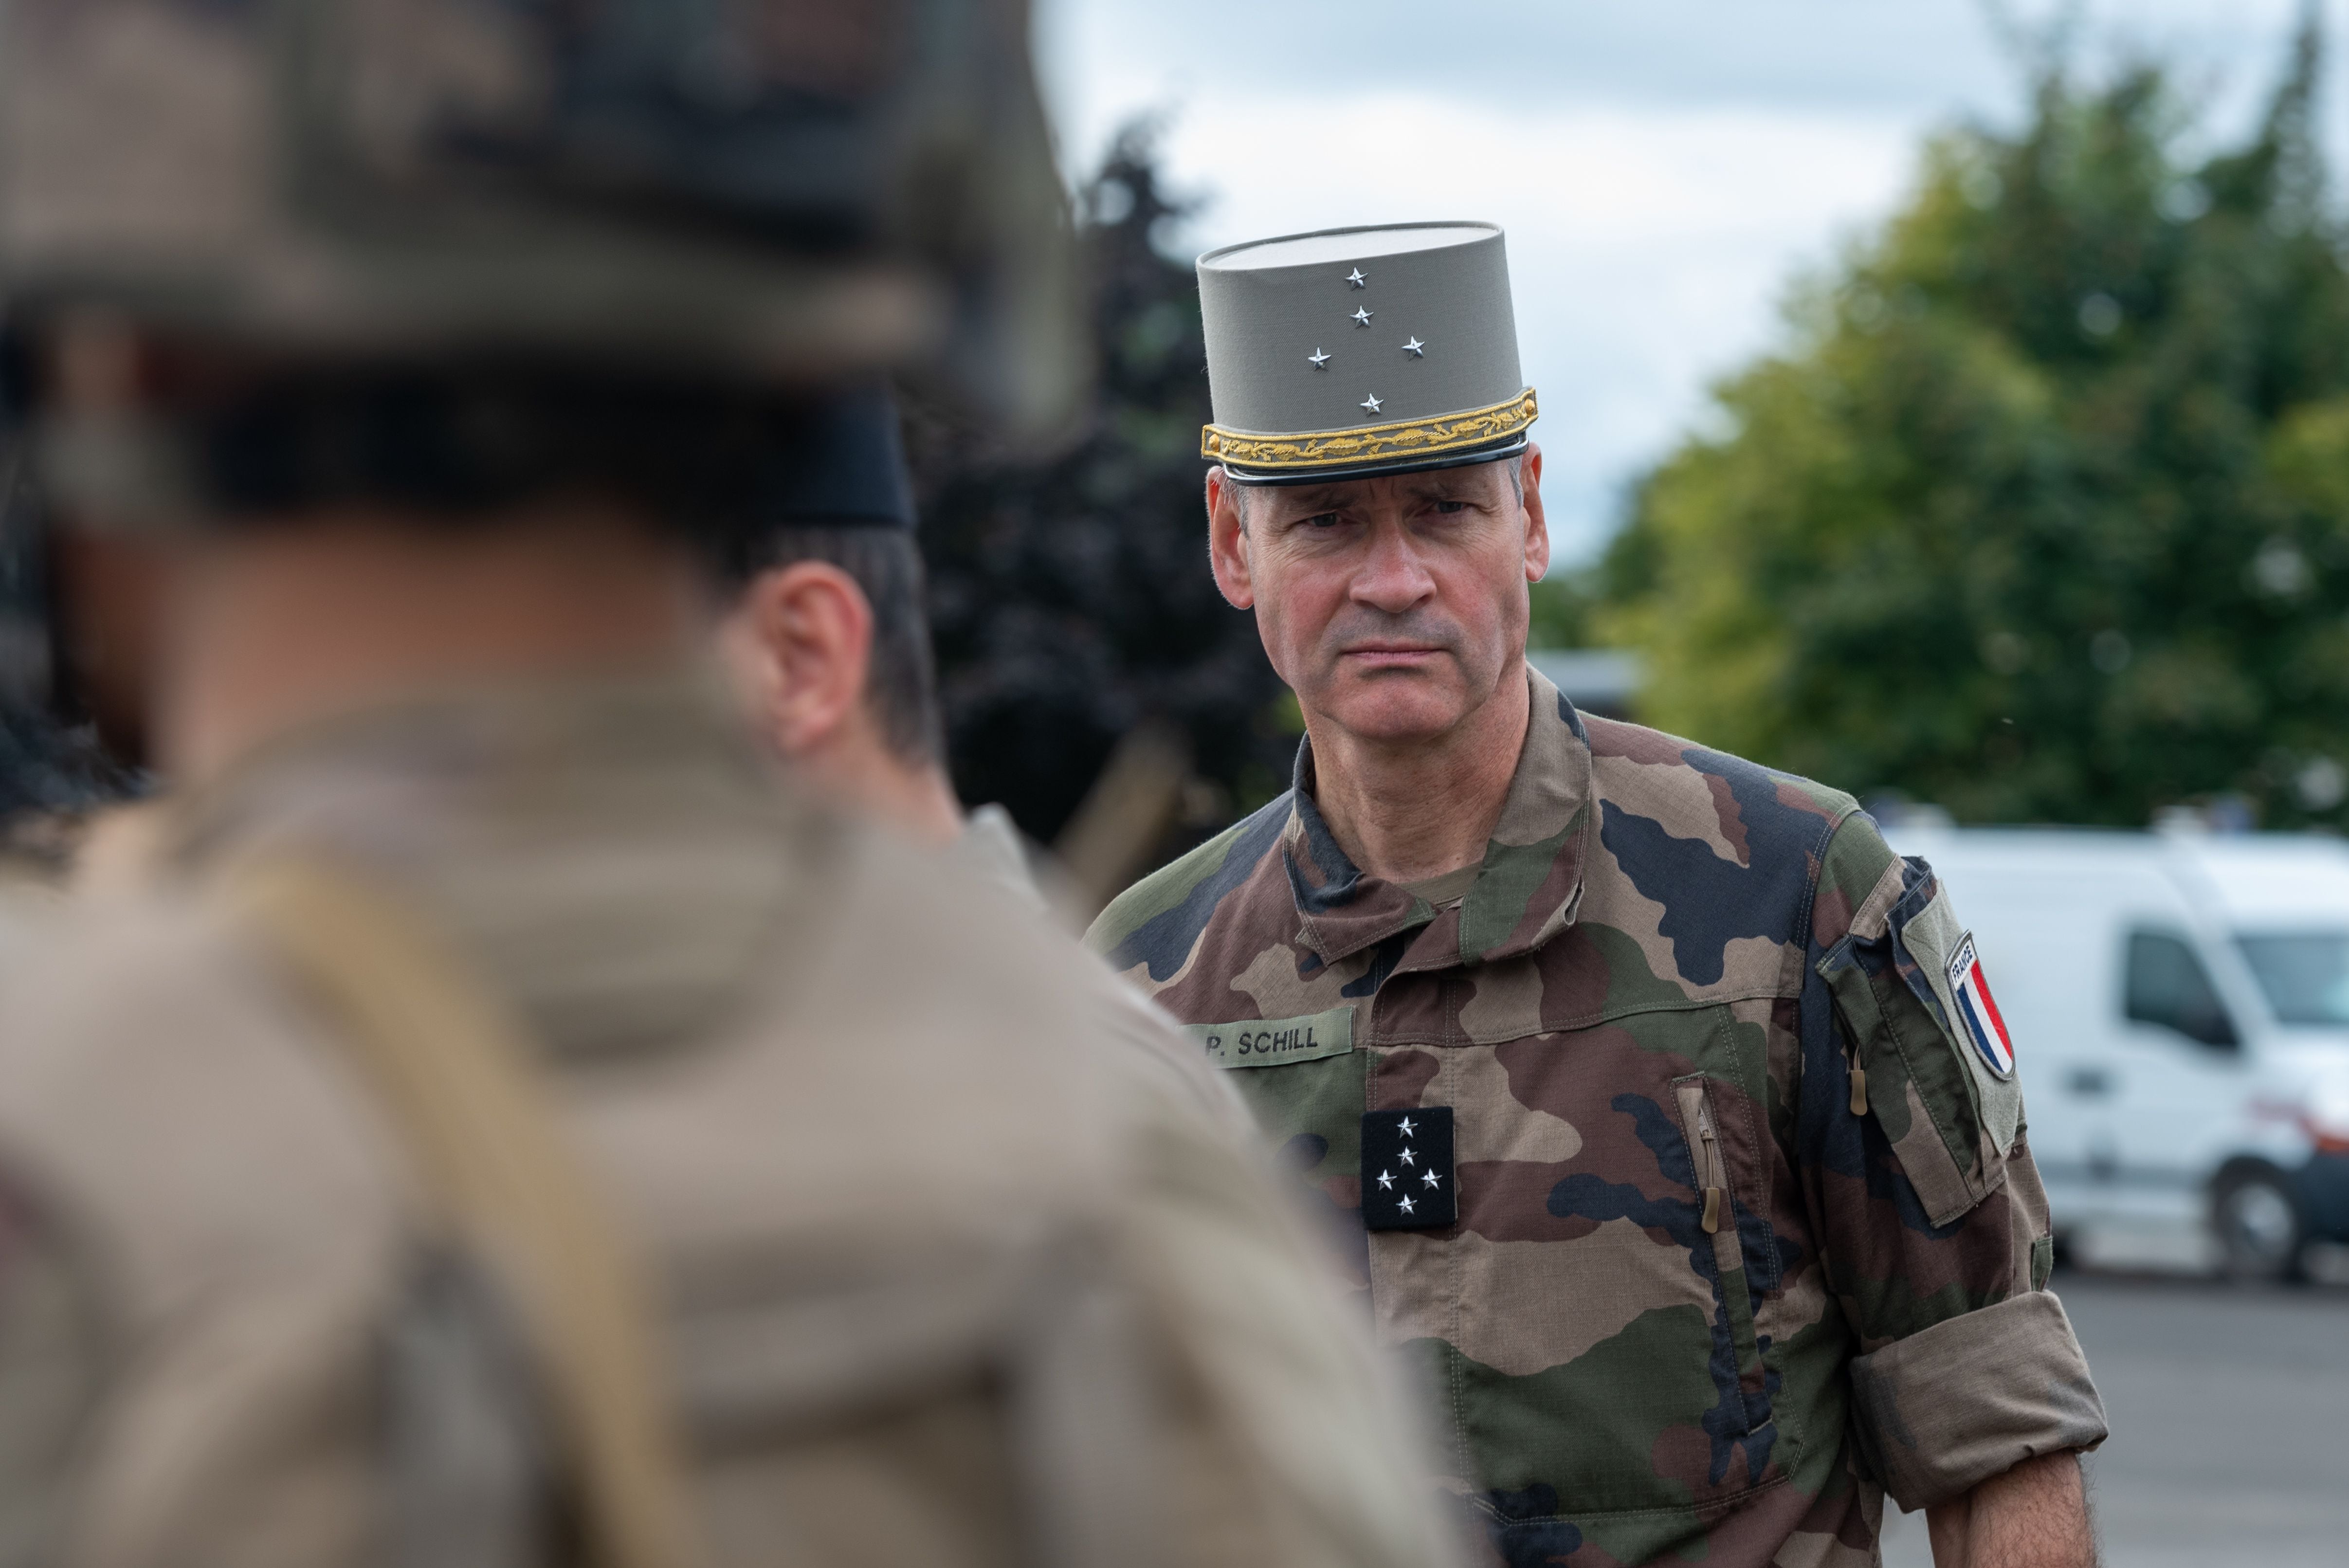 How France's Army chief is getting sucked into a 'Ukrainian tunnel'